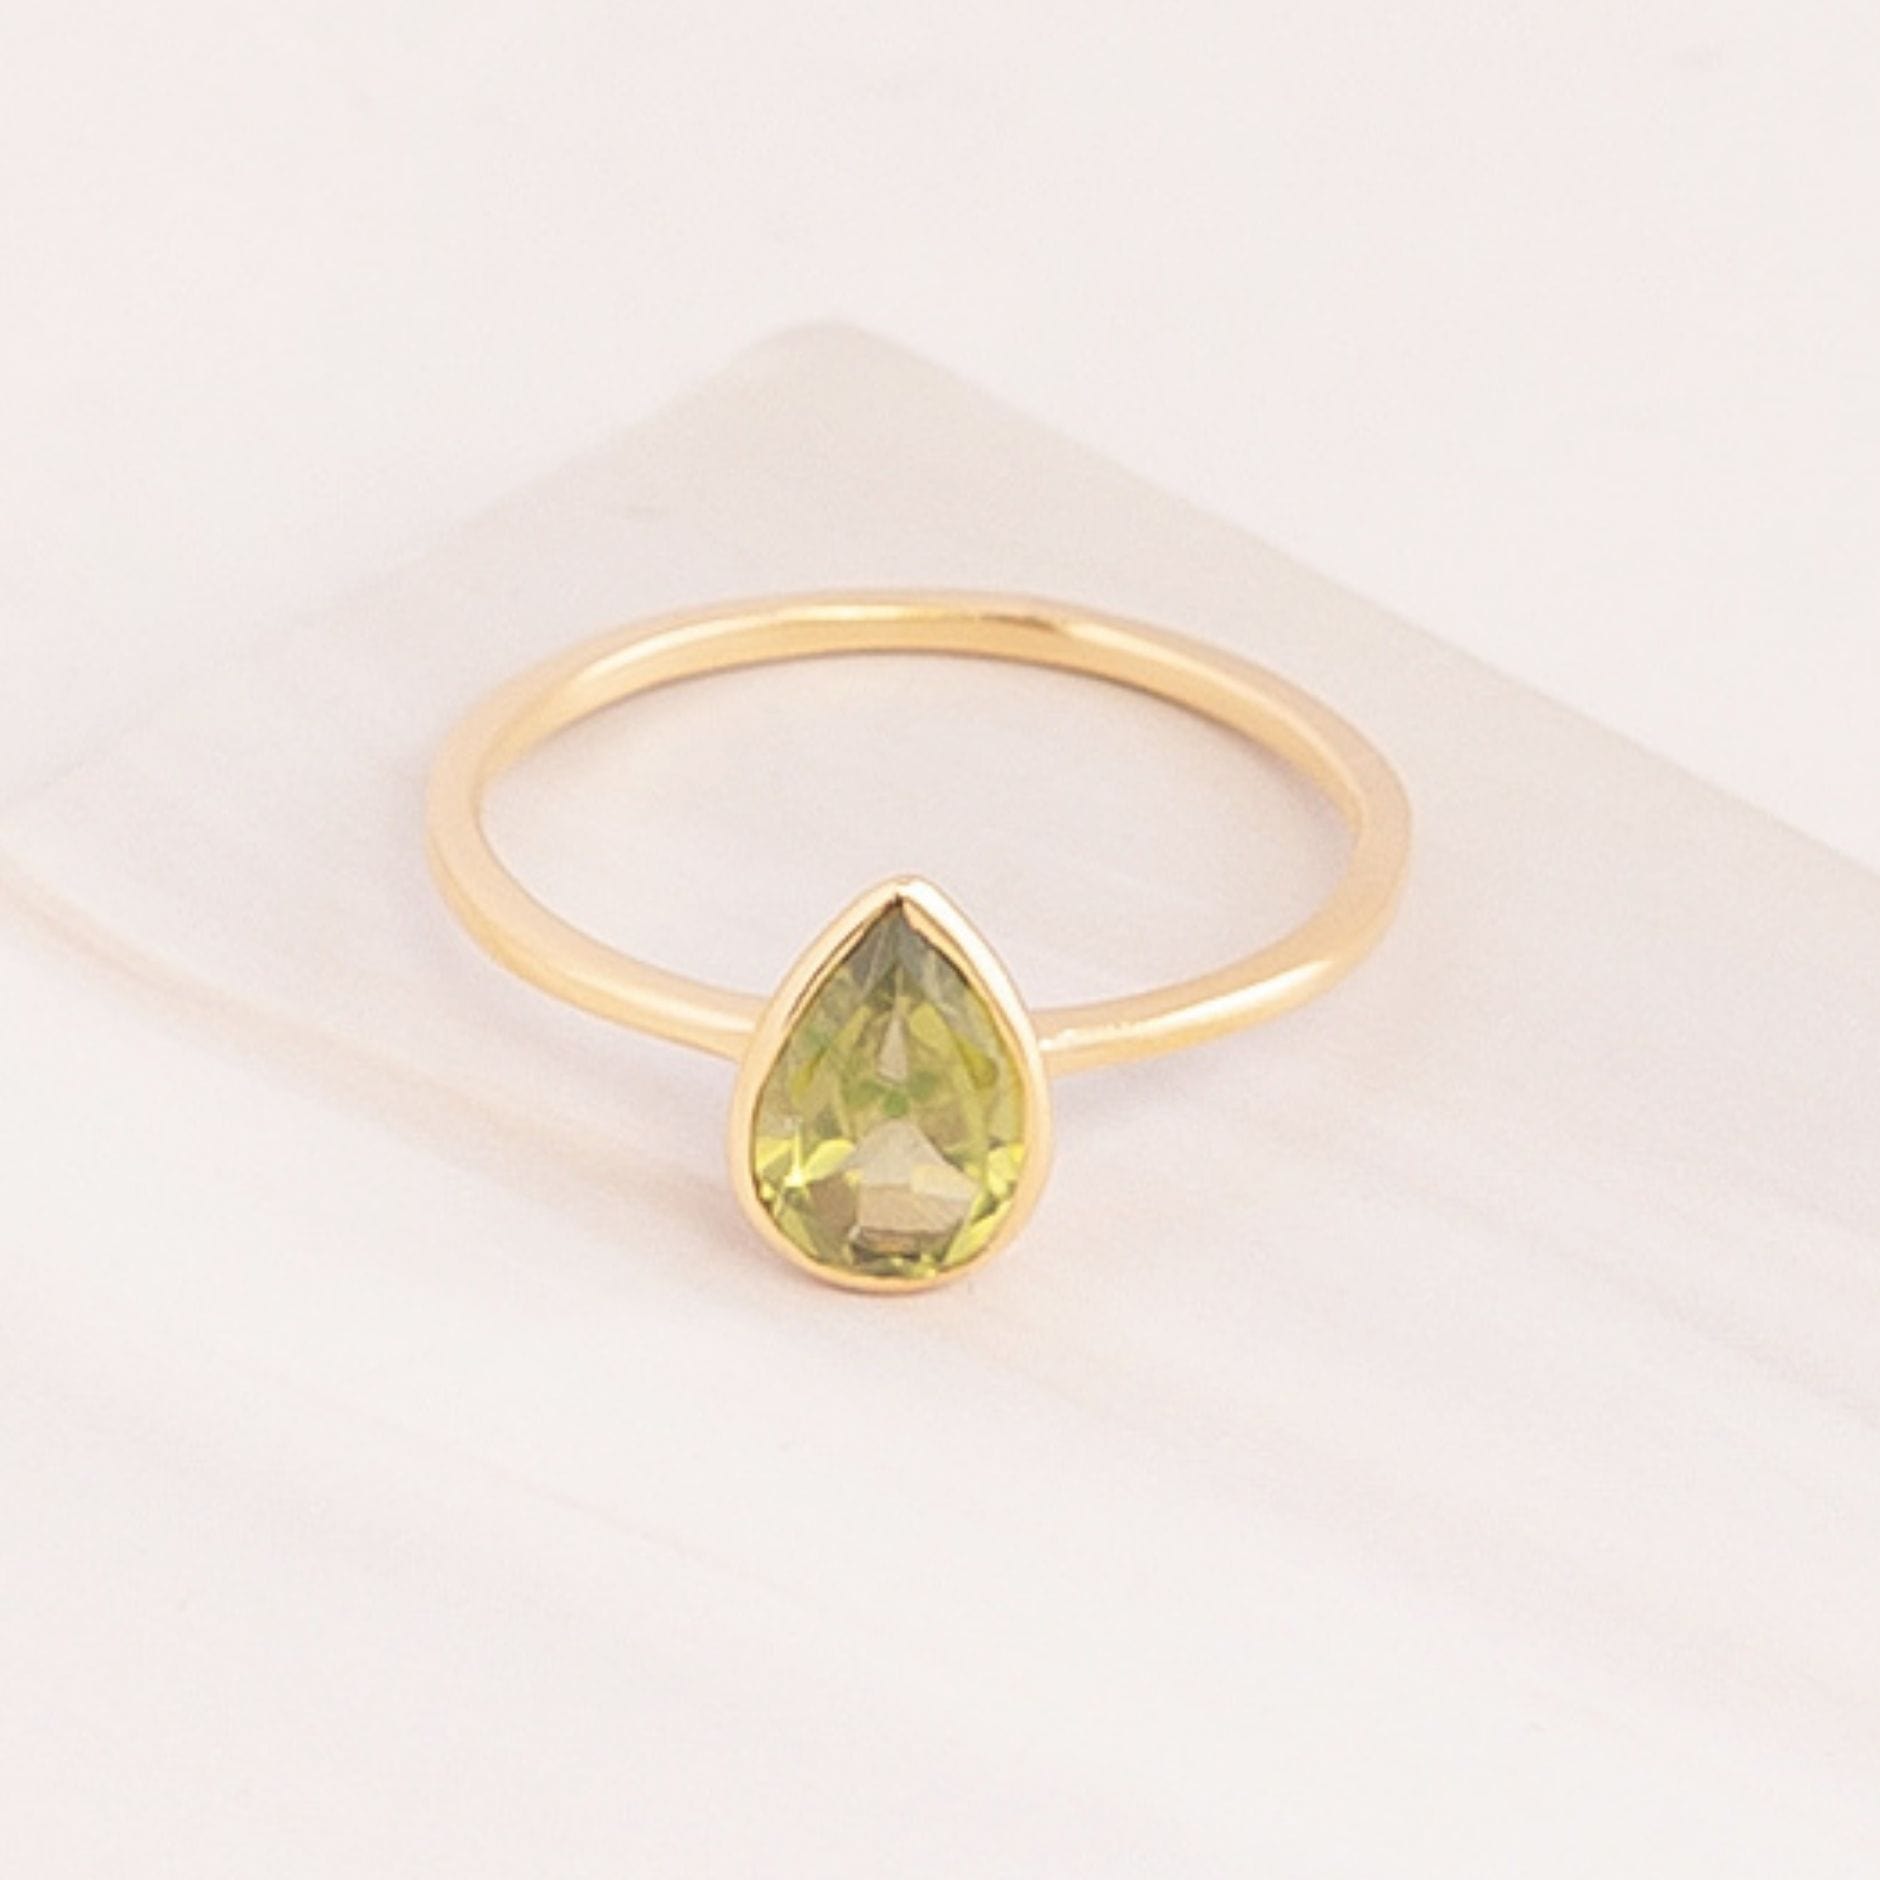 Emblem Jewelry Rings Green Peridot / Pear Signature Candy Gemstone Stack Rings (Ring Size 4)